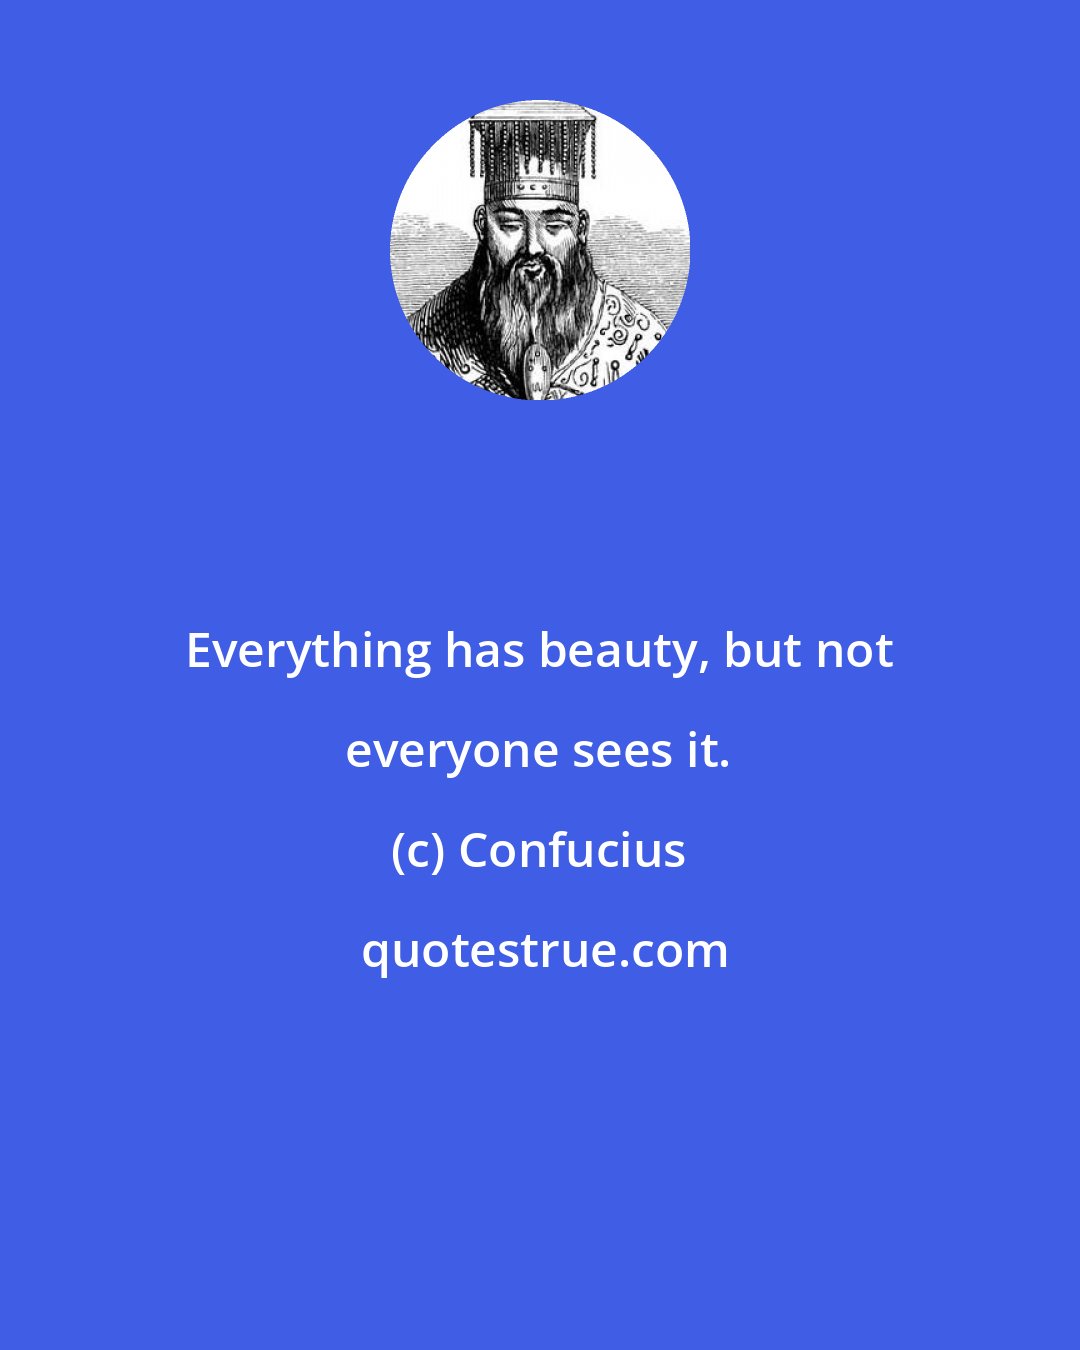 Confucius: Everything has beauty, but not everyone sees it.